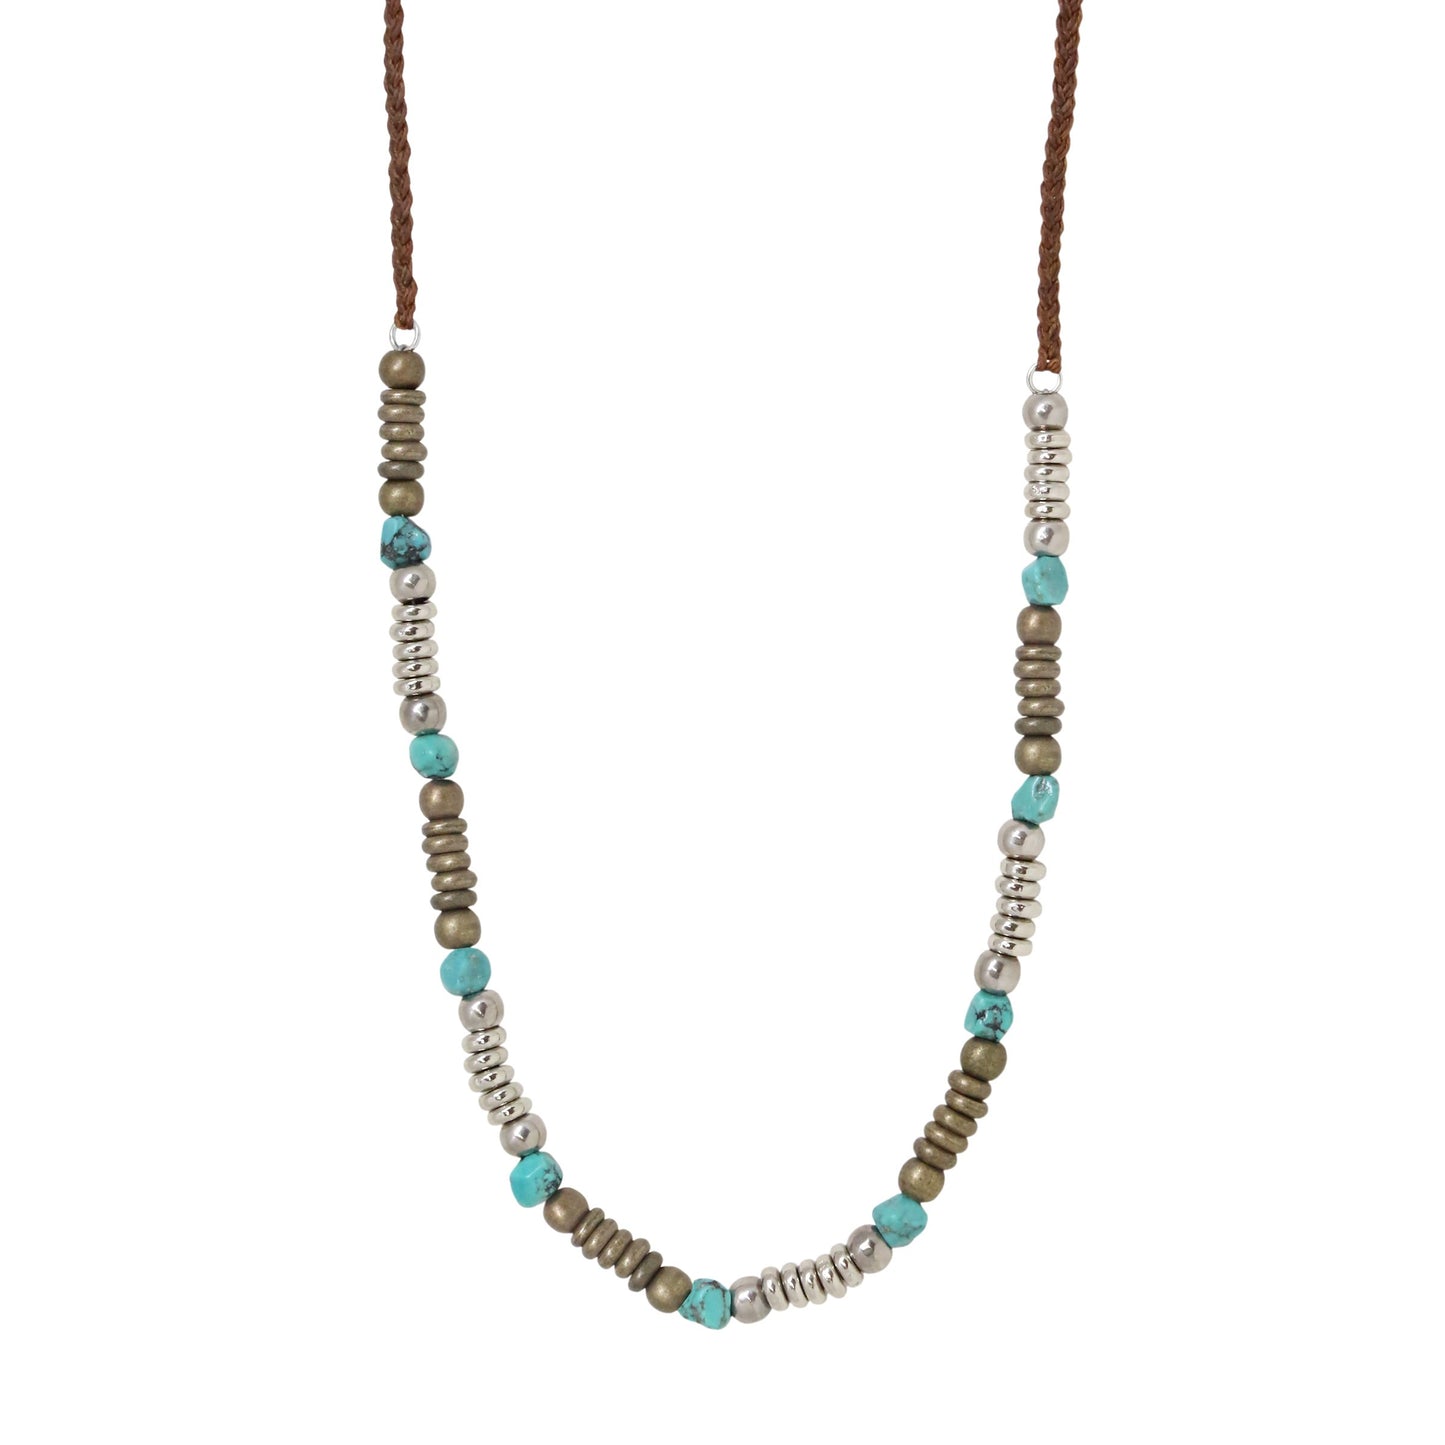 Mixed Metal and Turquoise Ring Necklace